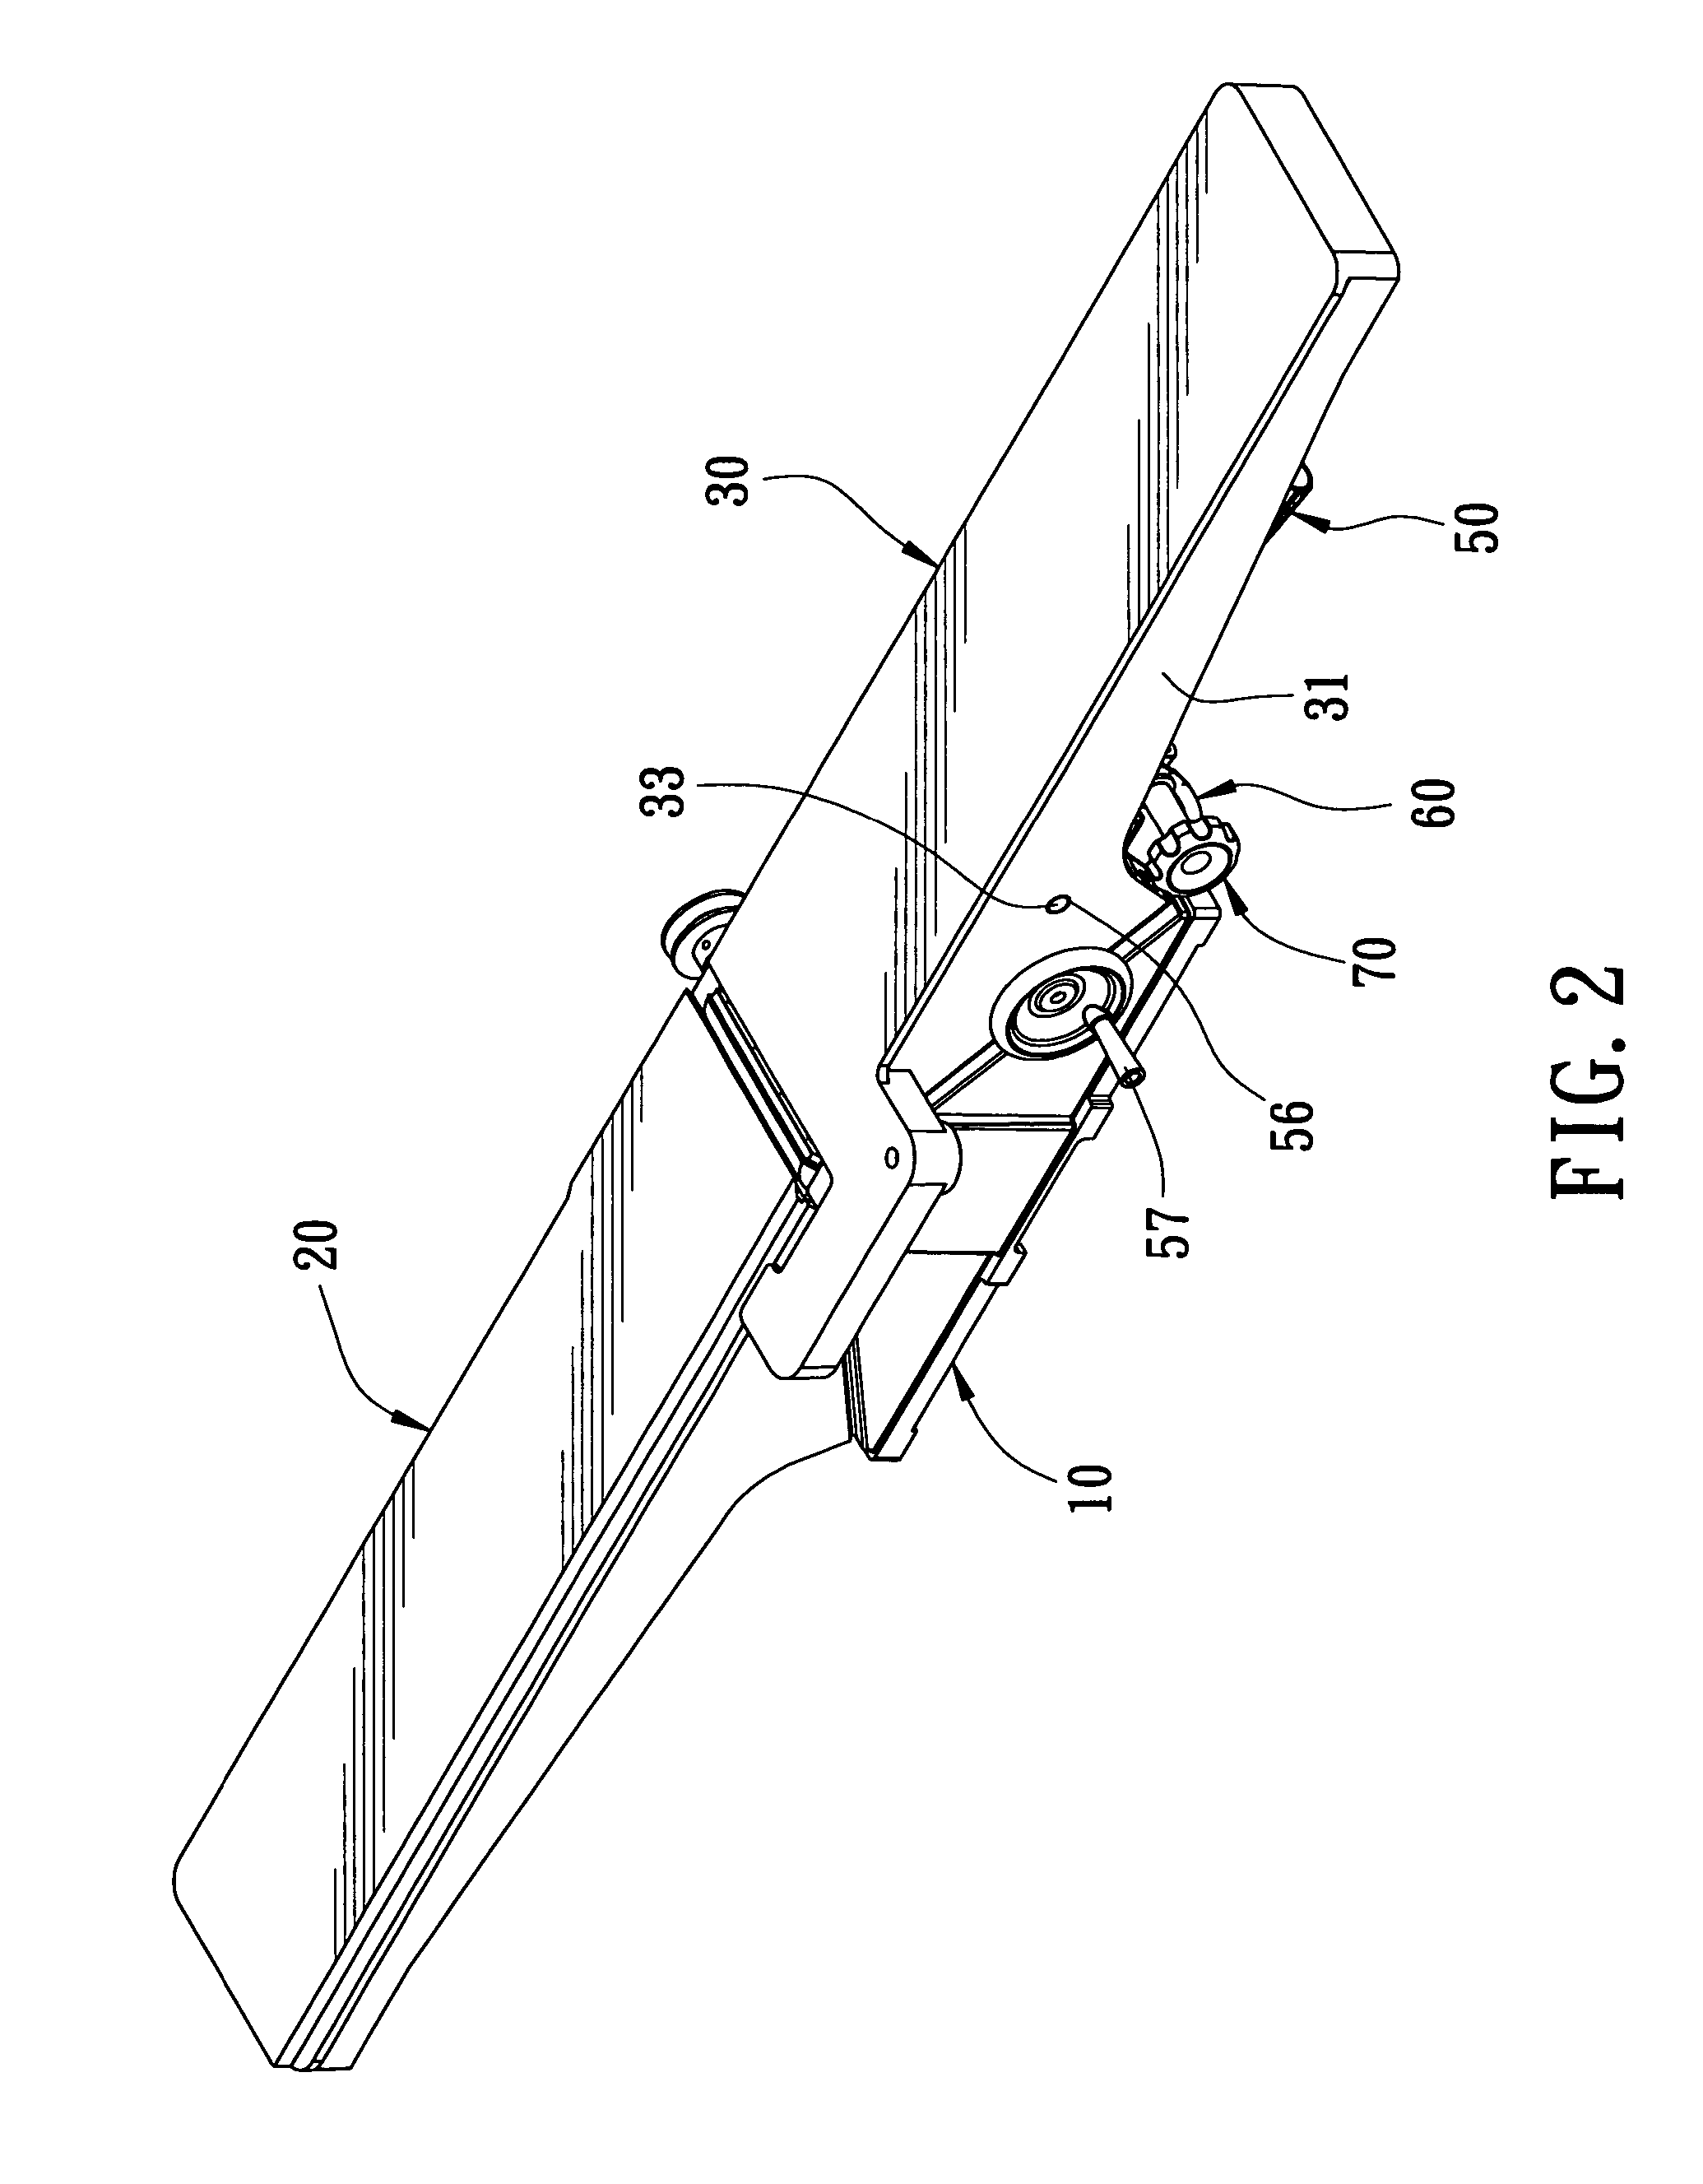 Swiftly and minutely adjusting device for a wood-planer working table